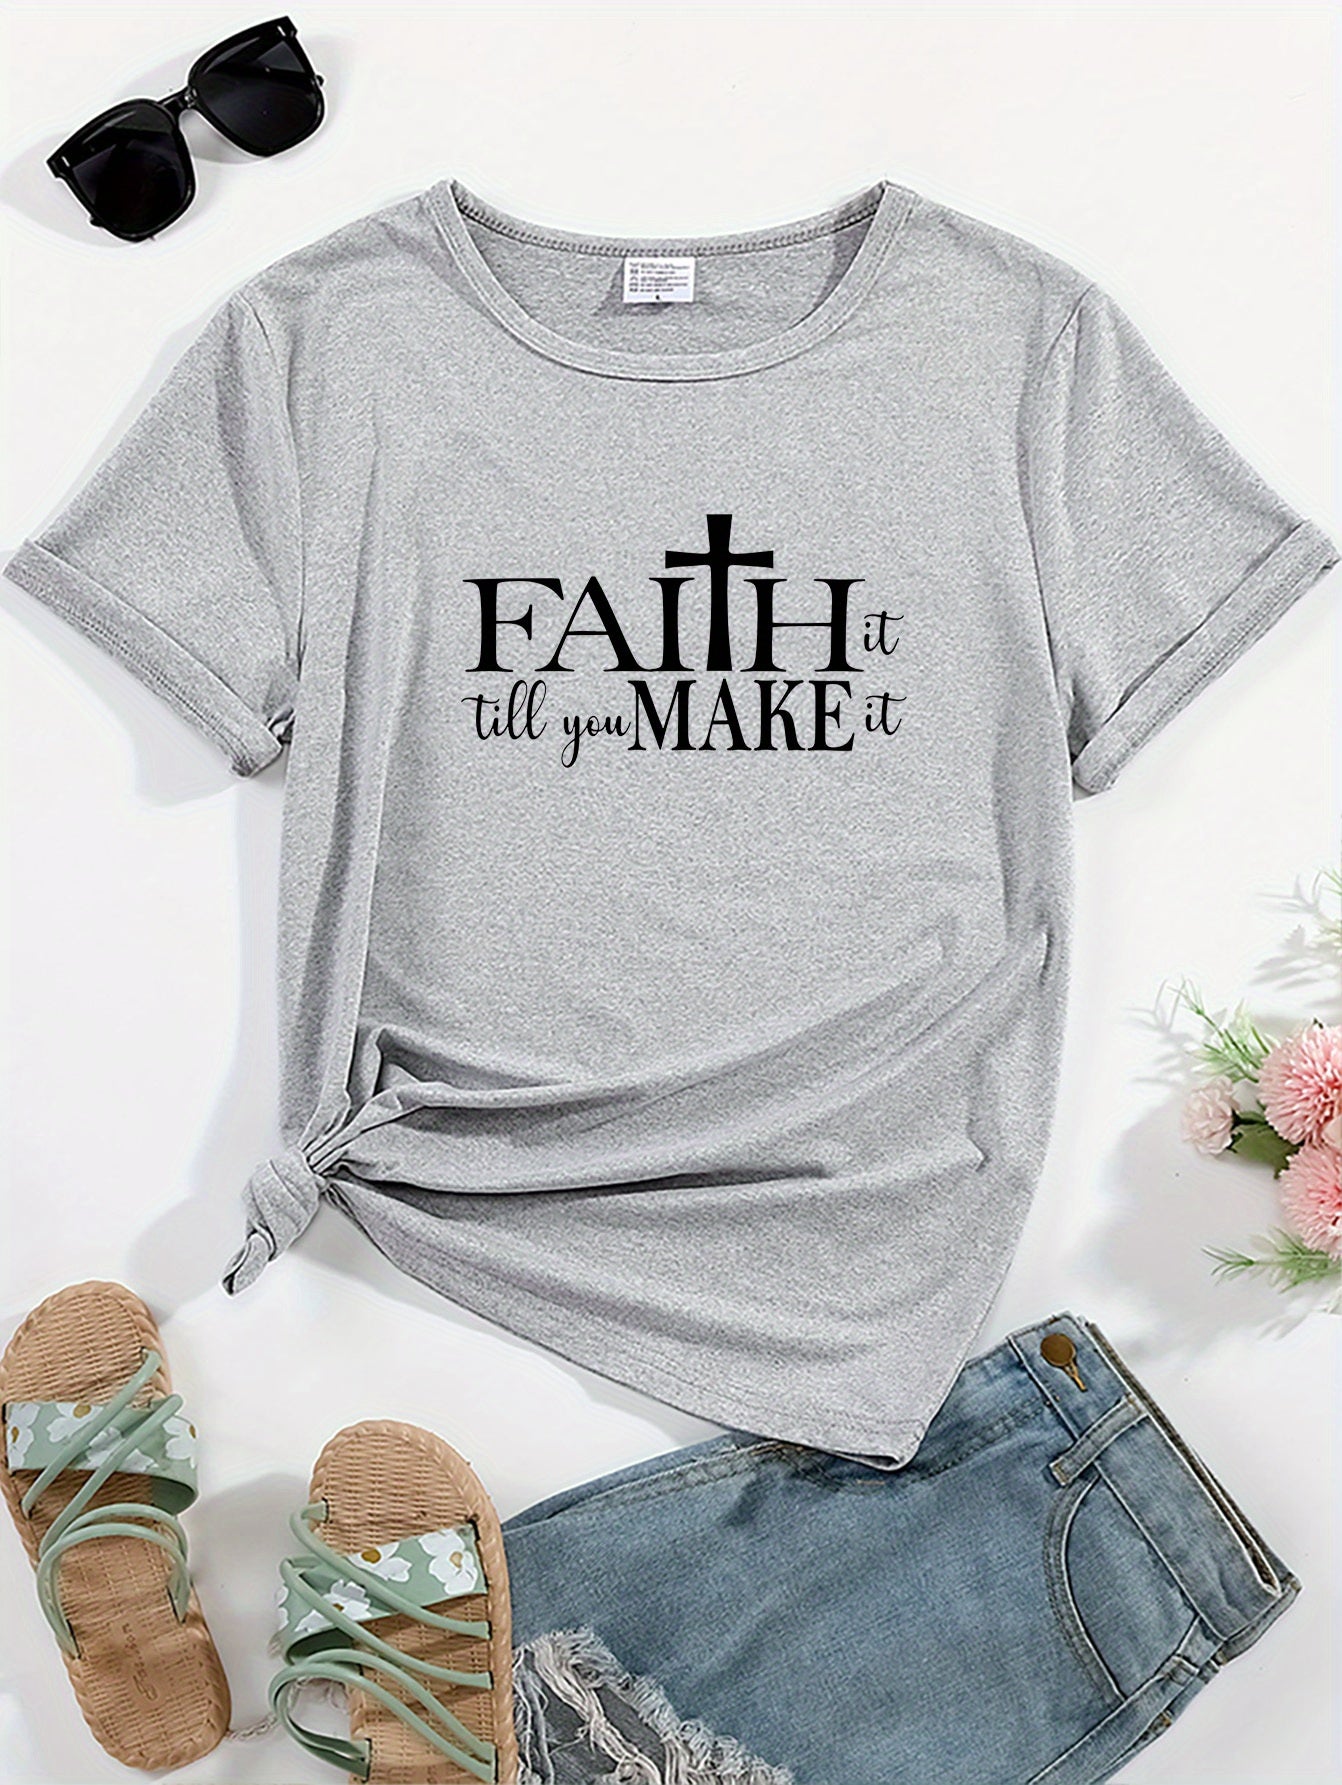 Faith Letter & Cross Graphic Crew Neck Sports Tee, Workout Short Sleeves Running Tops, Women's Activewear claimedbygoddesigns